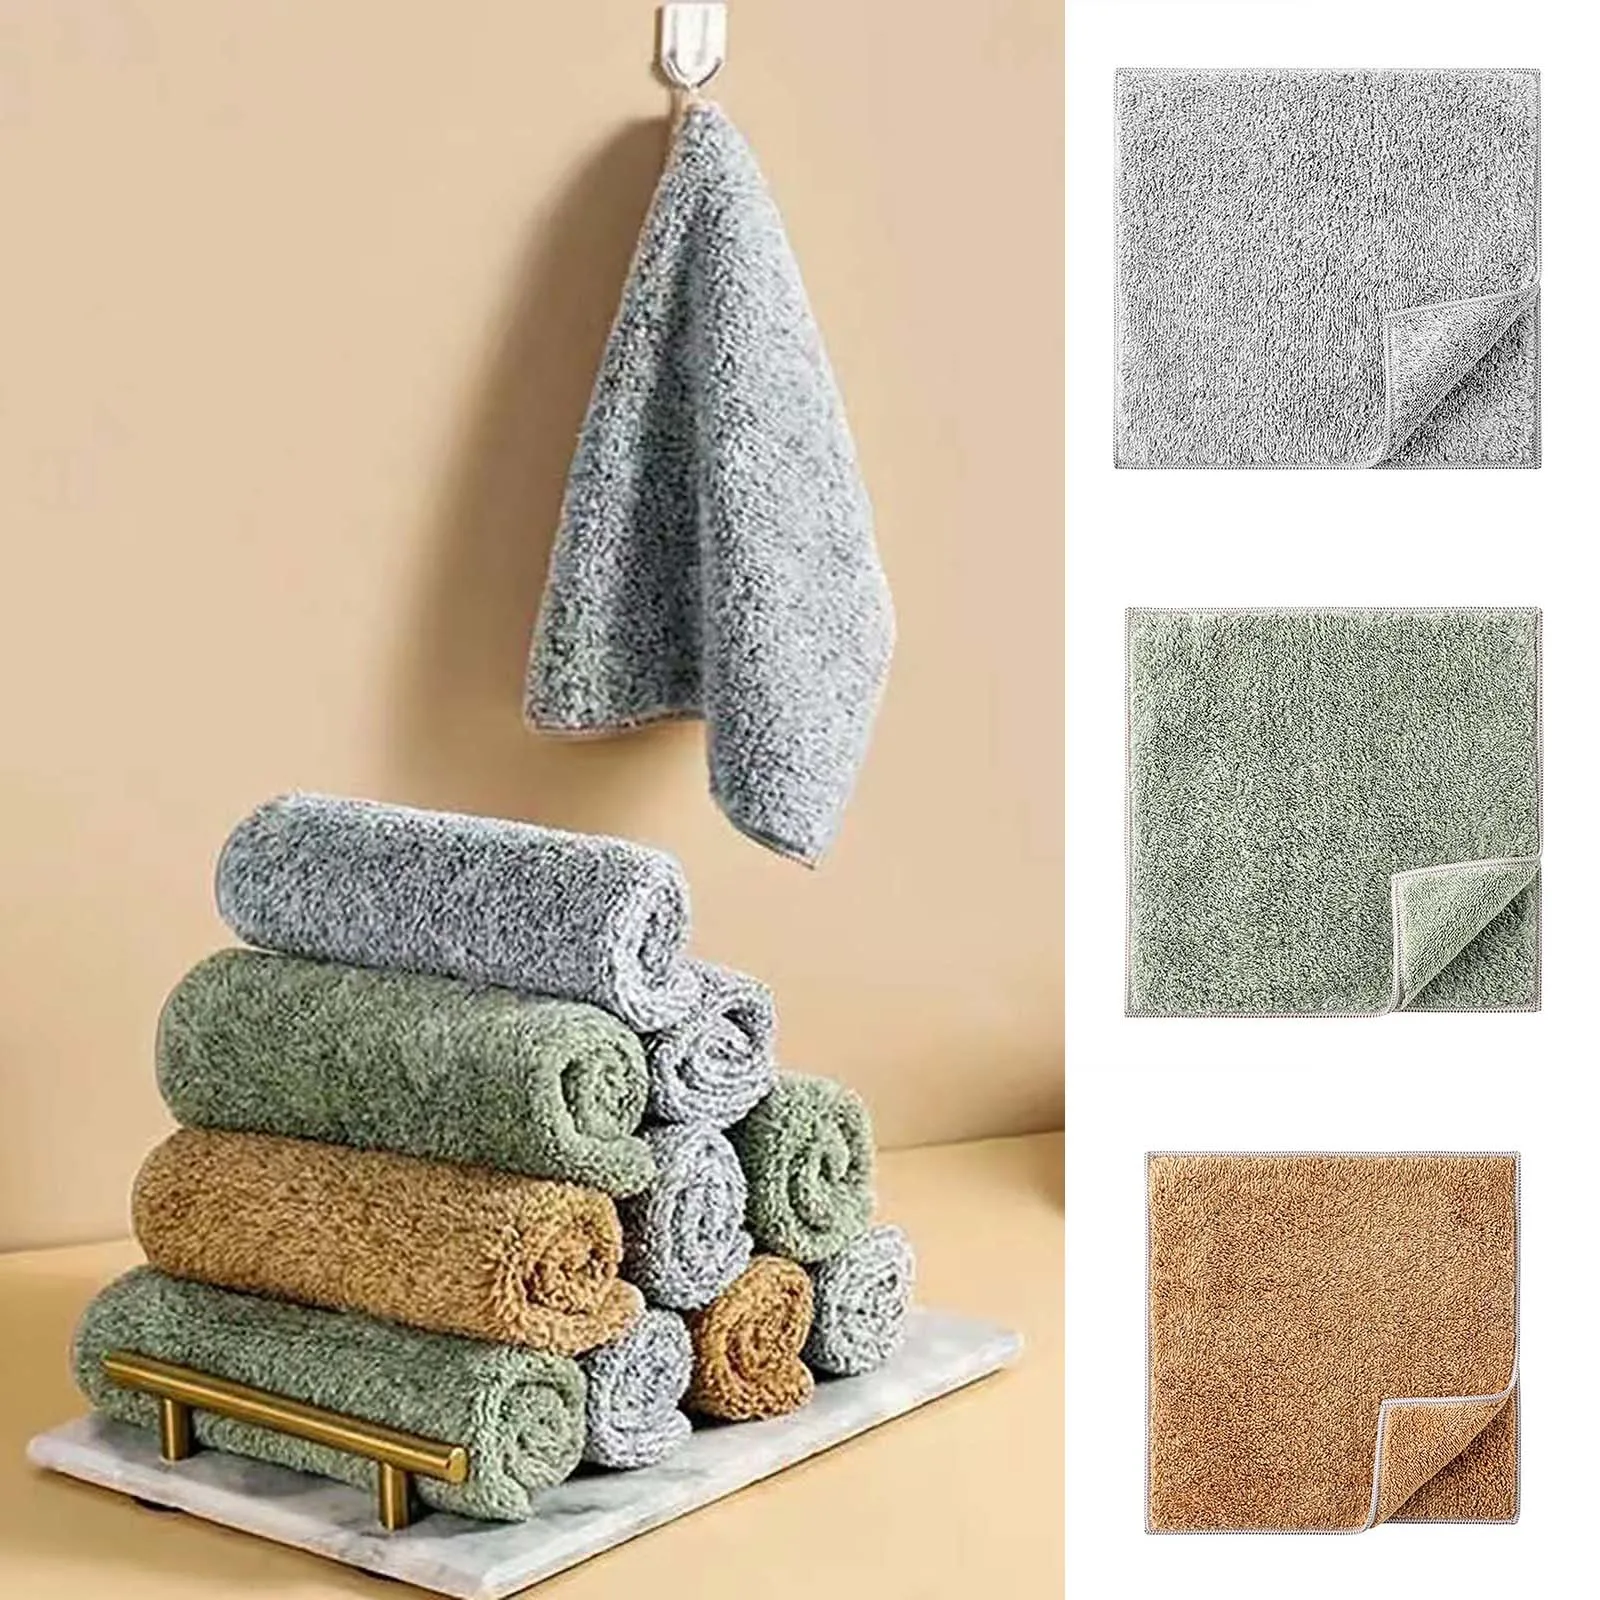 https://ae01.alicdn.com/kf/Sea7a549bc5274a7f9a090cdbc298819ed/Household-Cleaning-Japanese-Style-Fiber-Dishcloth-Non-Stick-Oil-Kitchen-Washcloths-Classic-Kitchen-Towels-30-pack.jpg